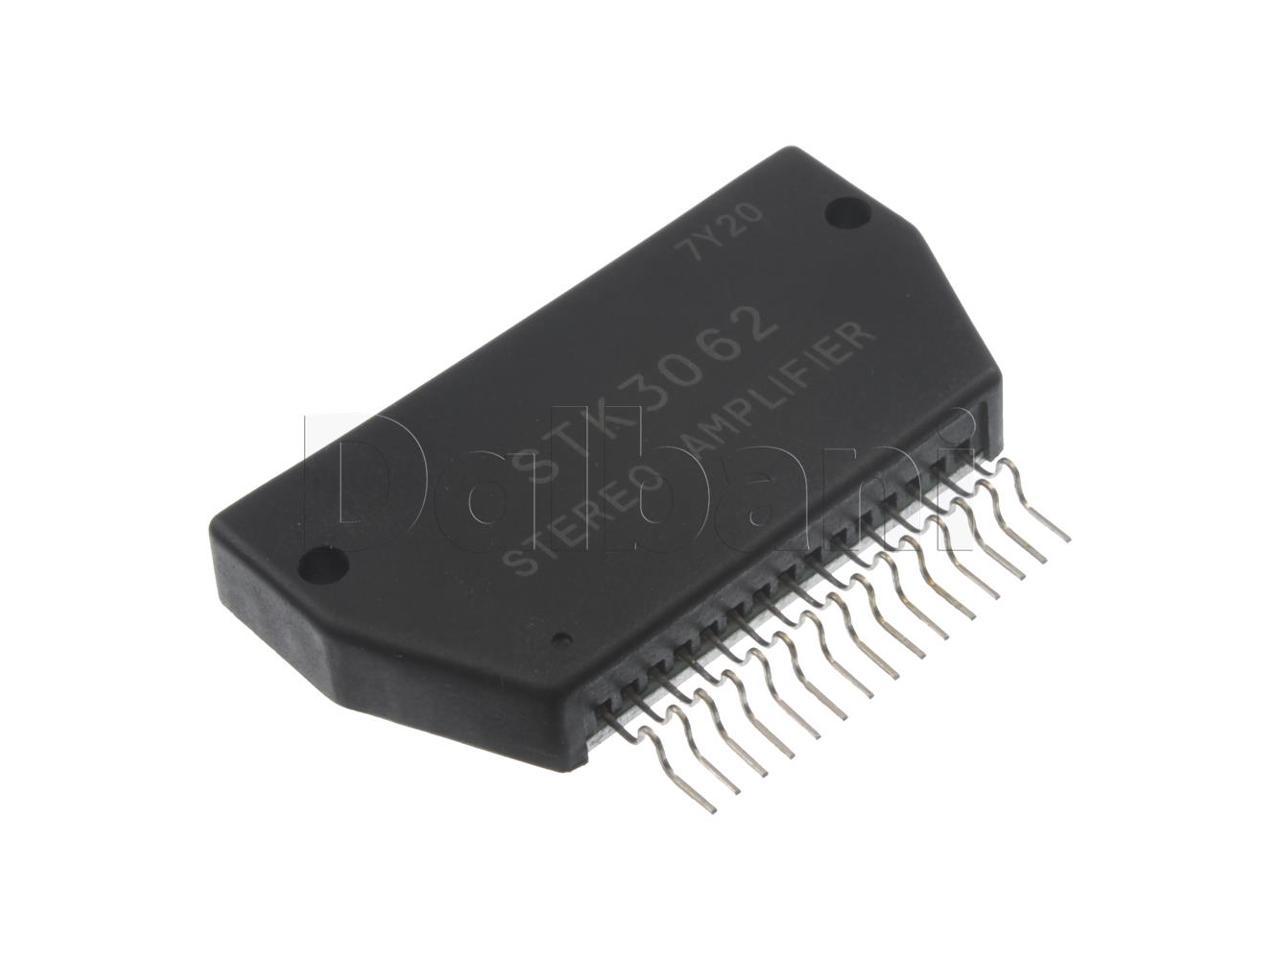 2pcs for SANYO Stk394-210 Stk394 210 Integrated Circuit for sale online 